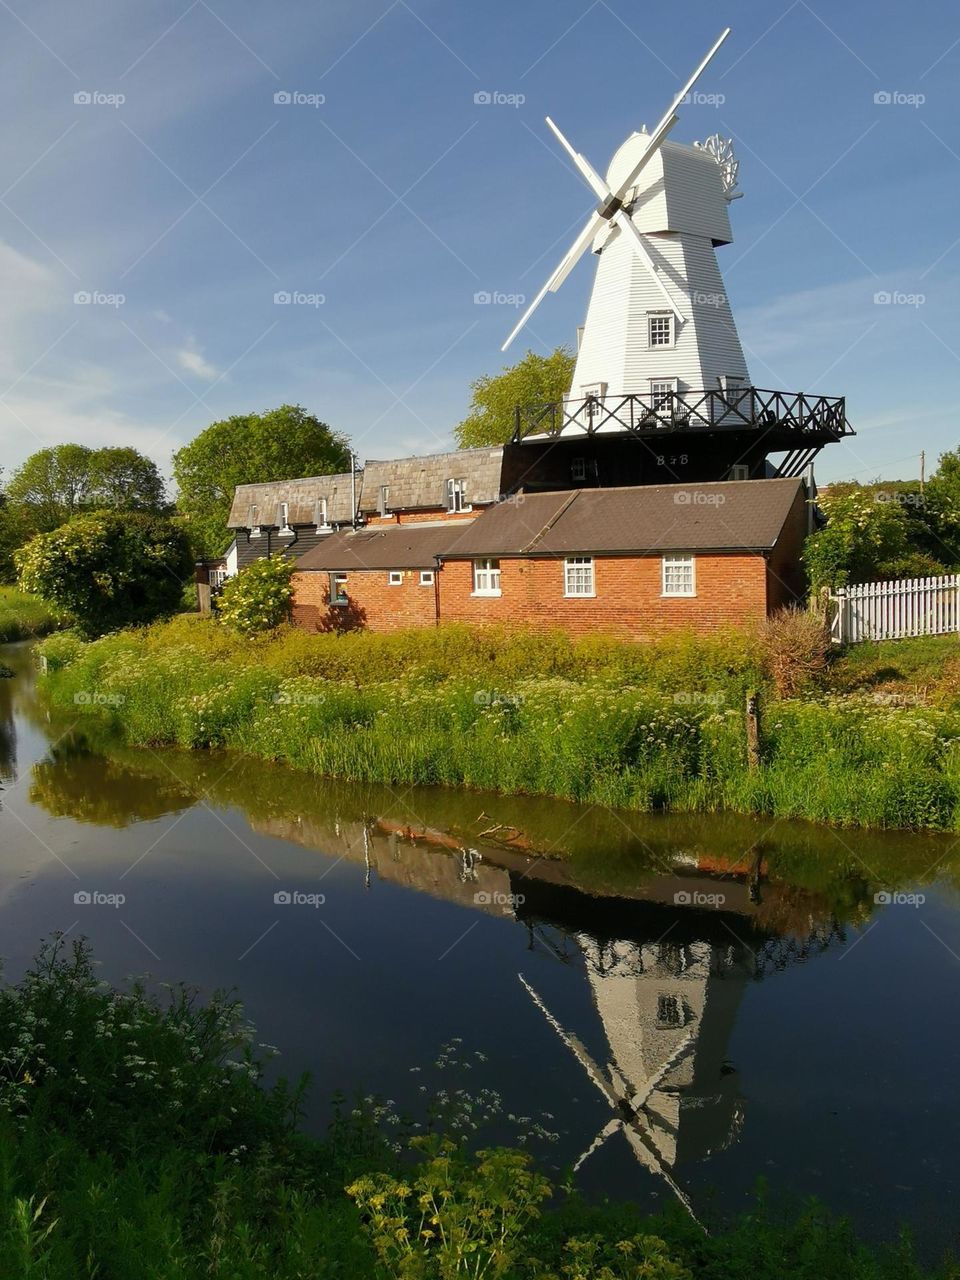 Beautiful reflection of the old mill in the river. Countryside. Sunny summer day.